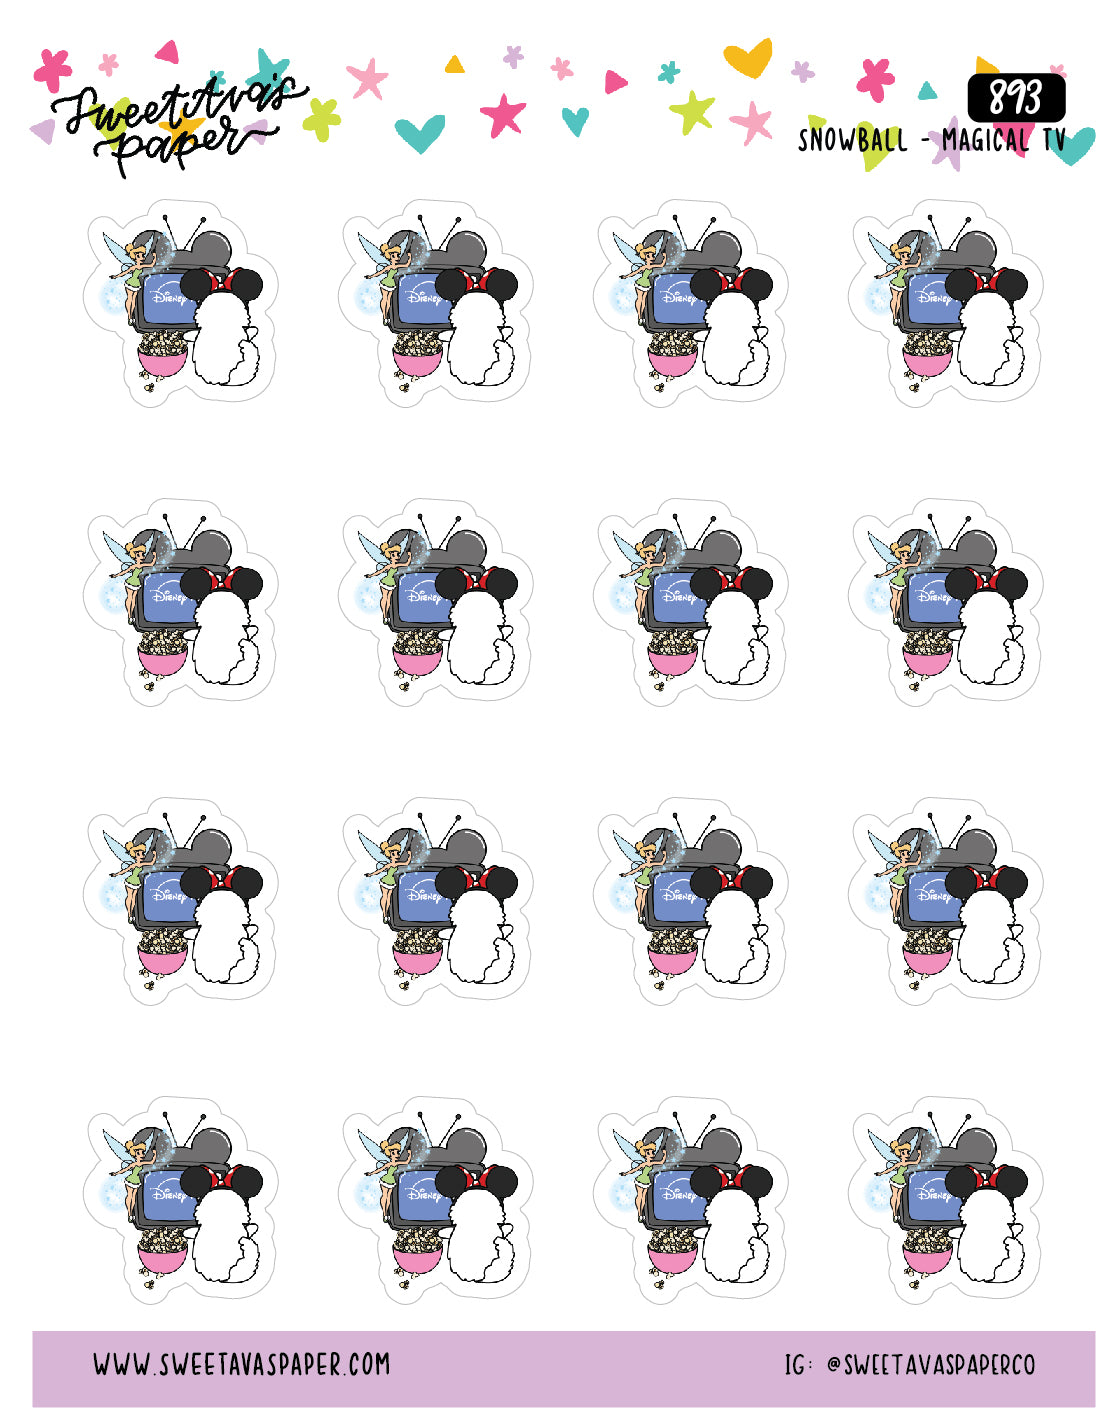 Magical TV Show Planner Stickers - Snowball The Cat - [893